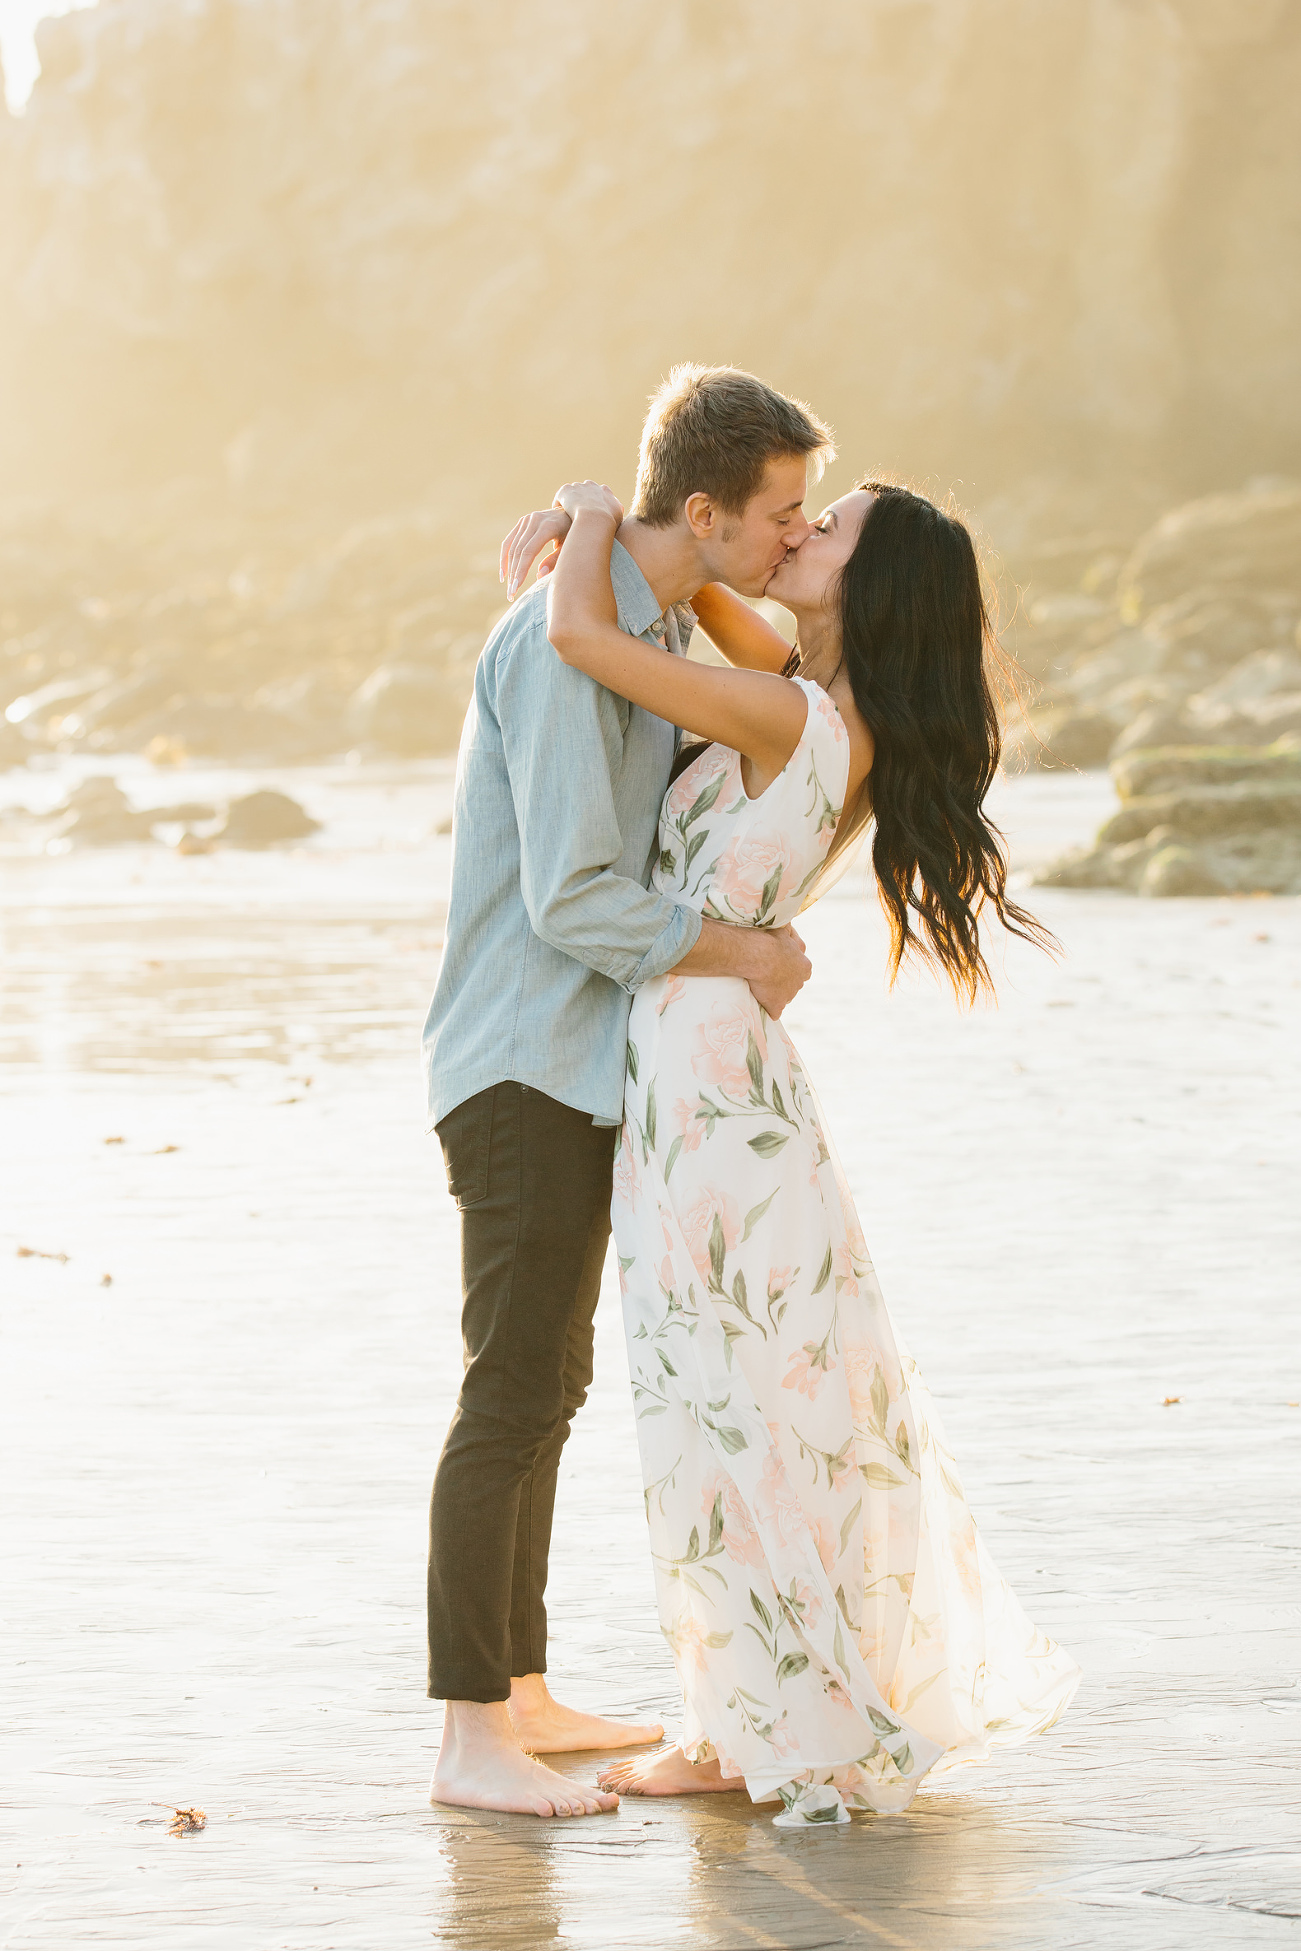 A girl and guy kissing on the beach in warm light